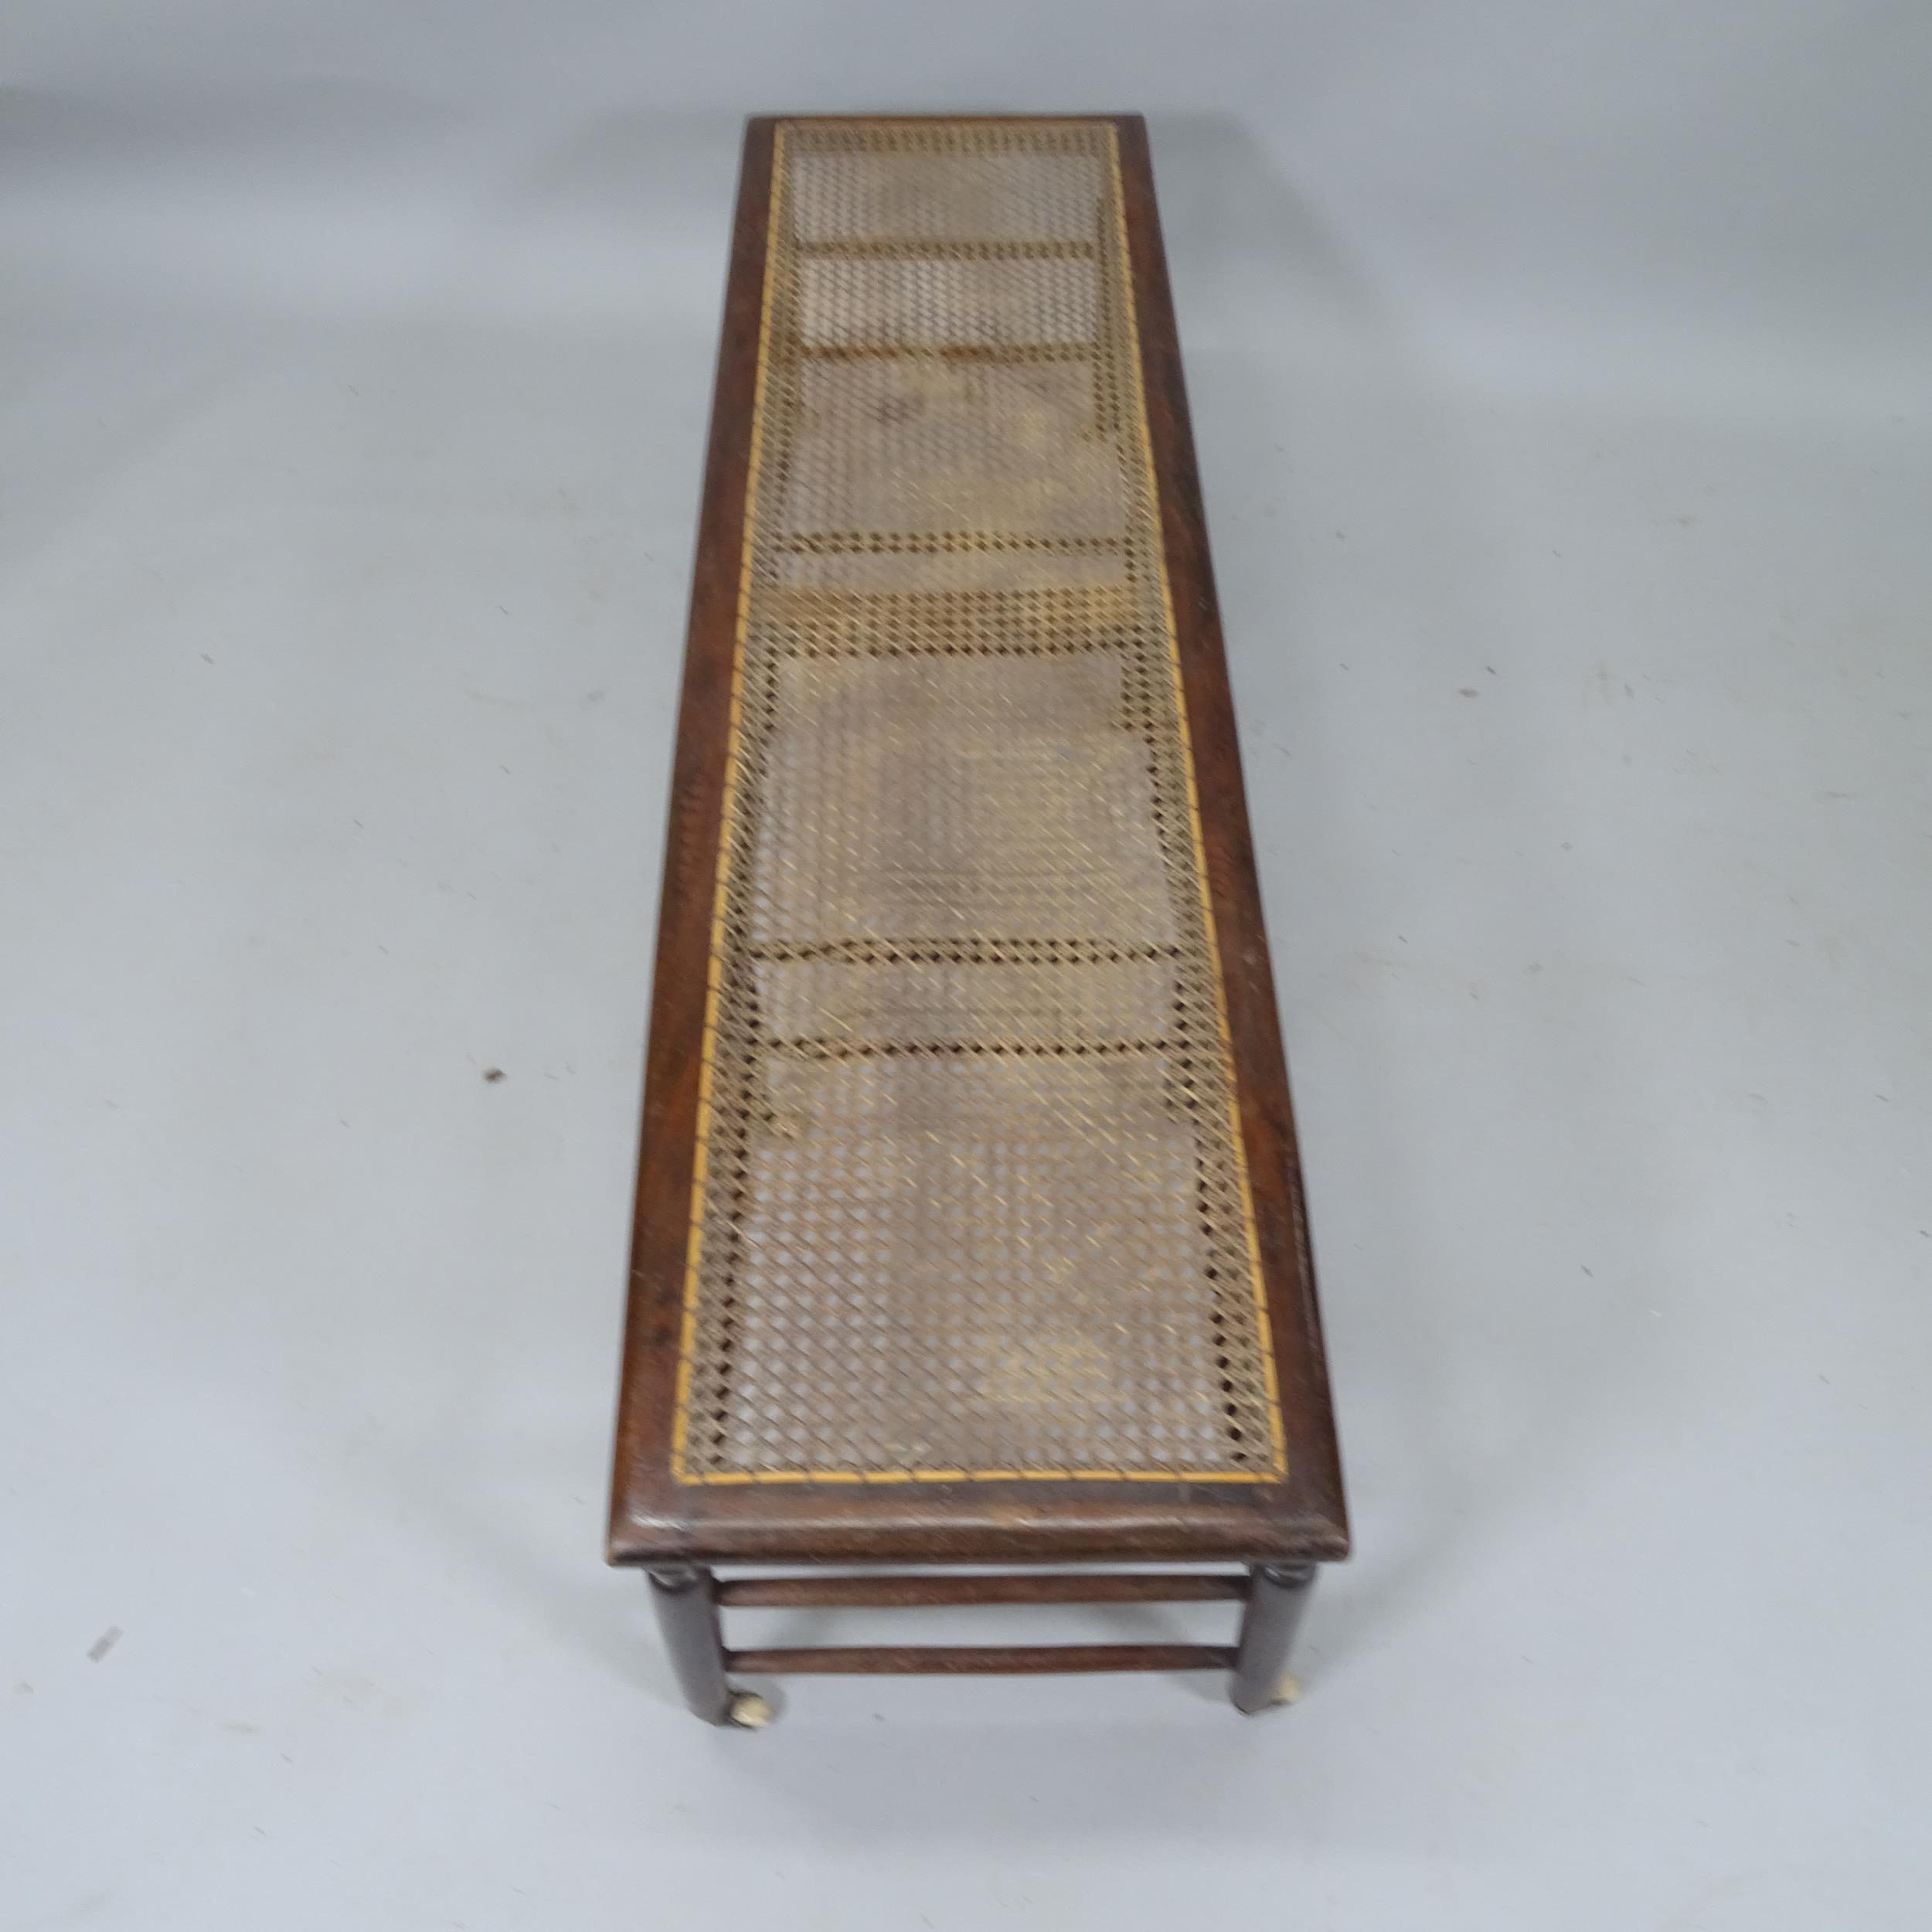 A Victorian window seat with caned panel, turned spindles and original casters, 137cm x 39cm x 39cm - Image 2 of 2